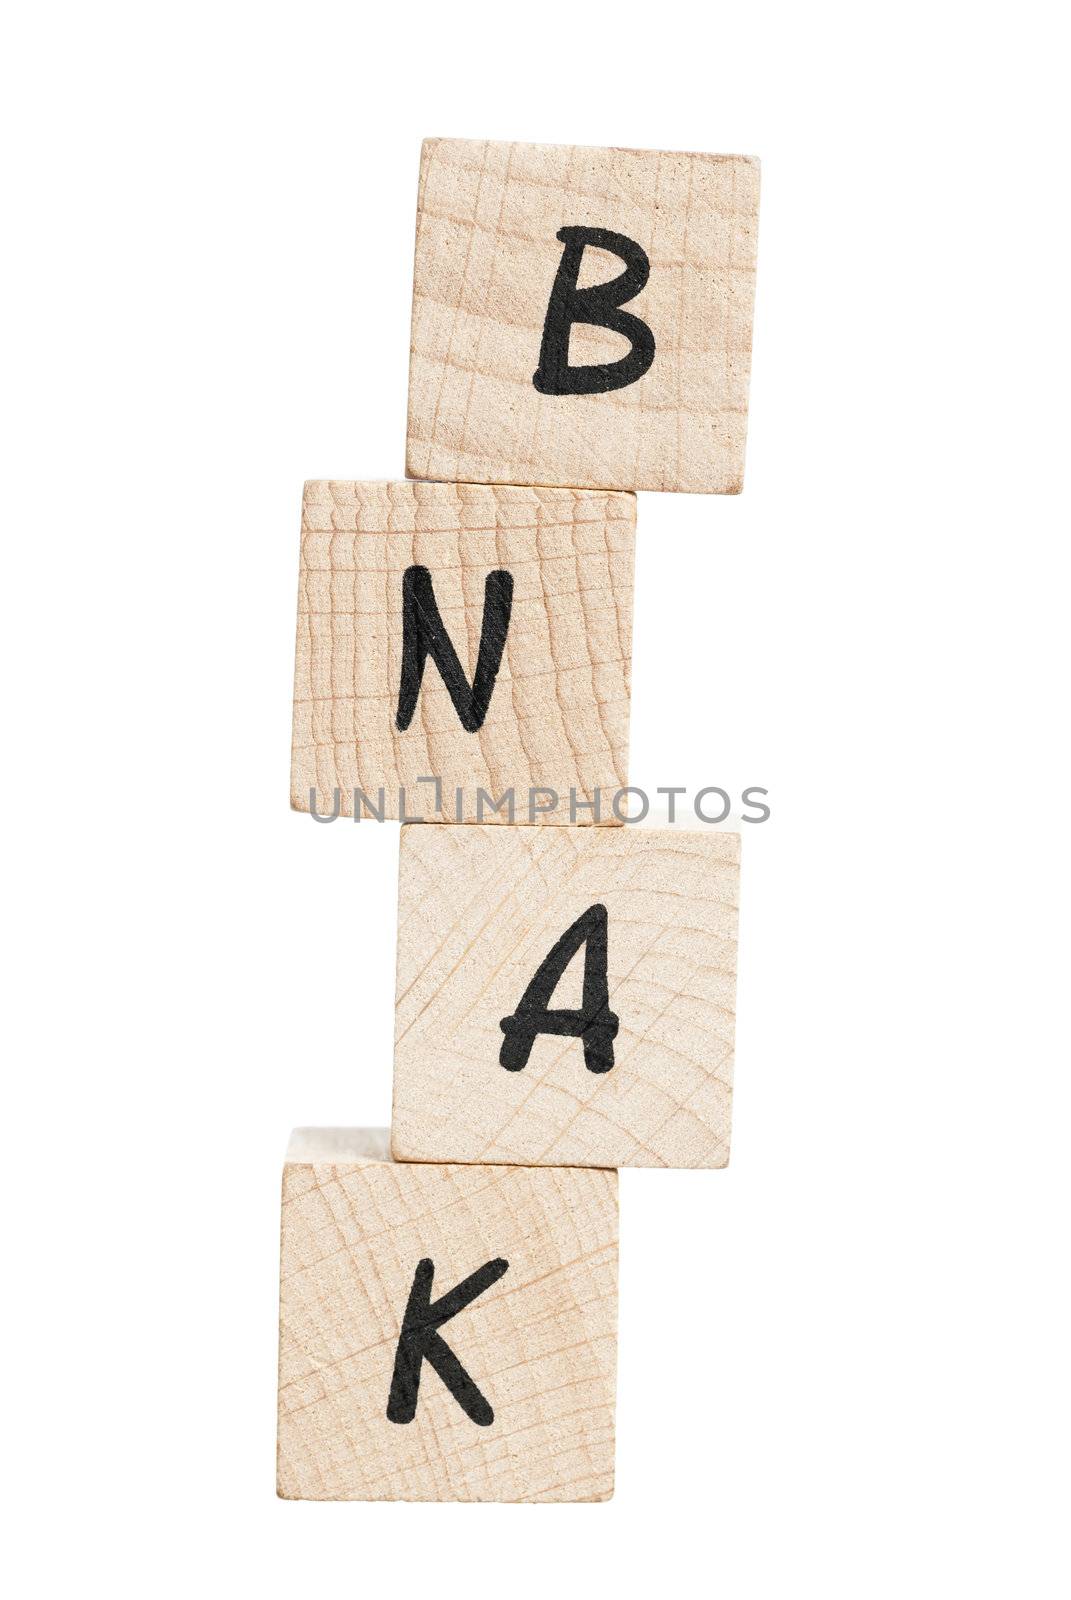 Word Bank Misspelled With Wooden Blocks. by swellphotography